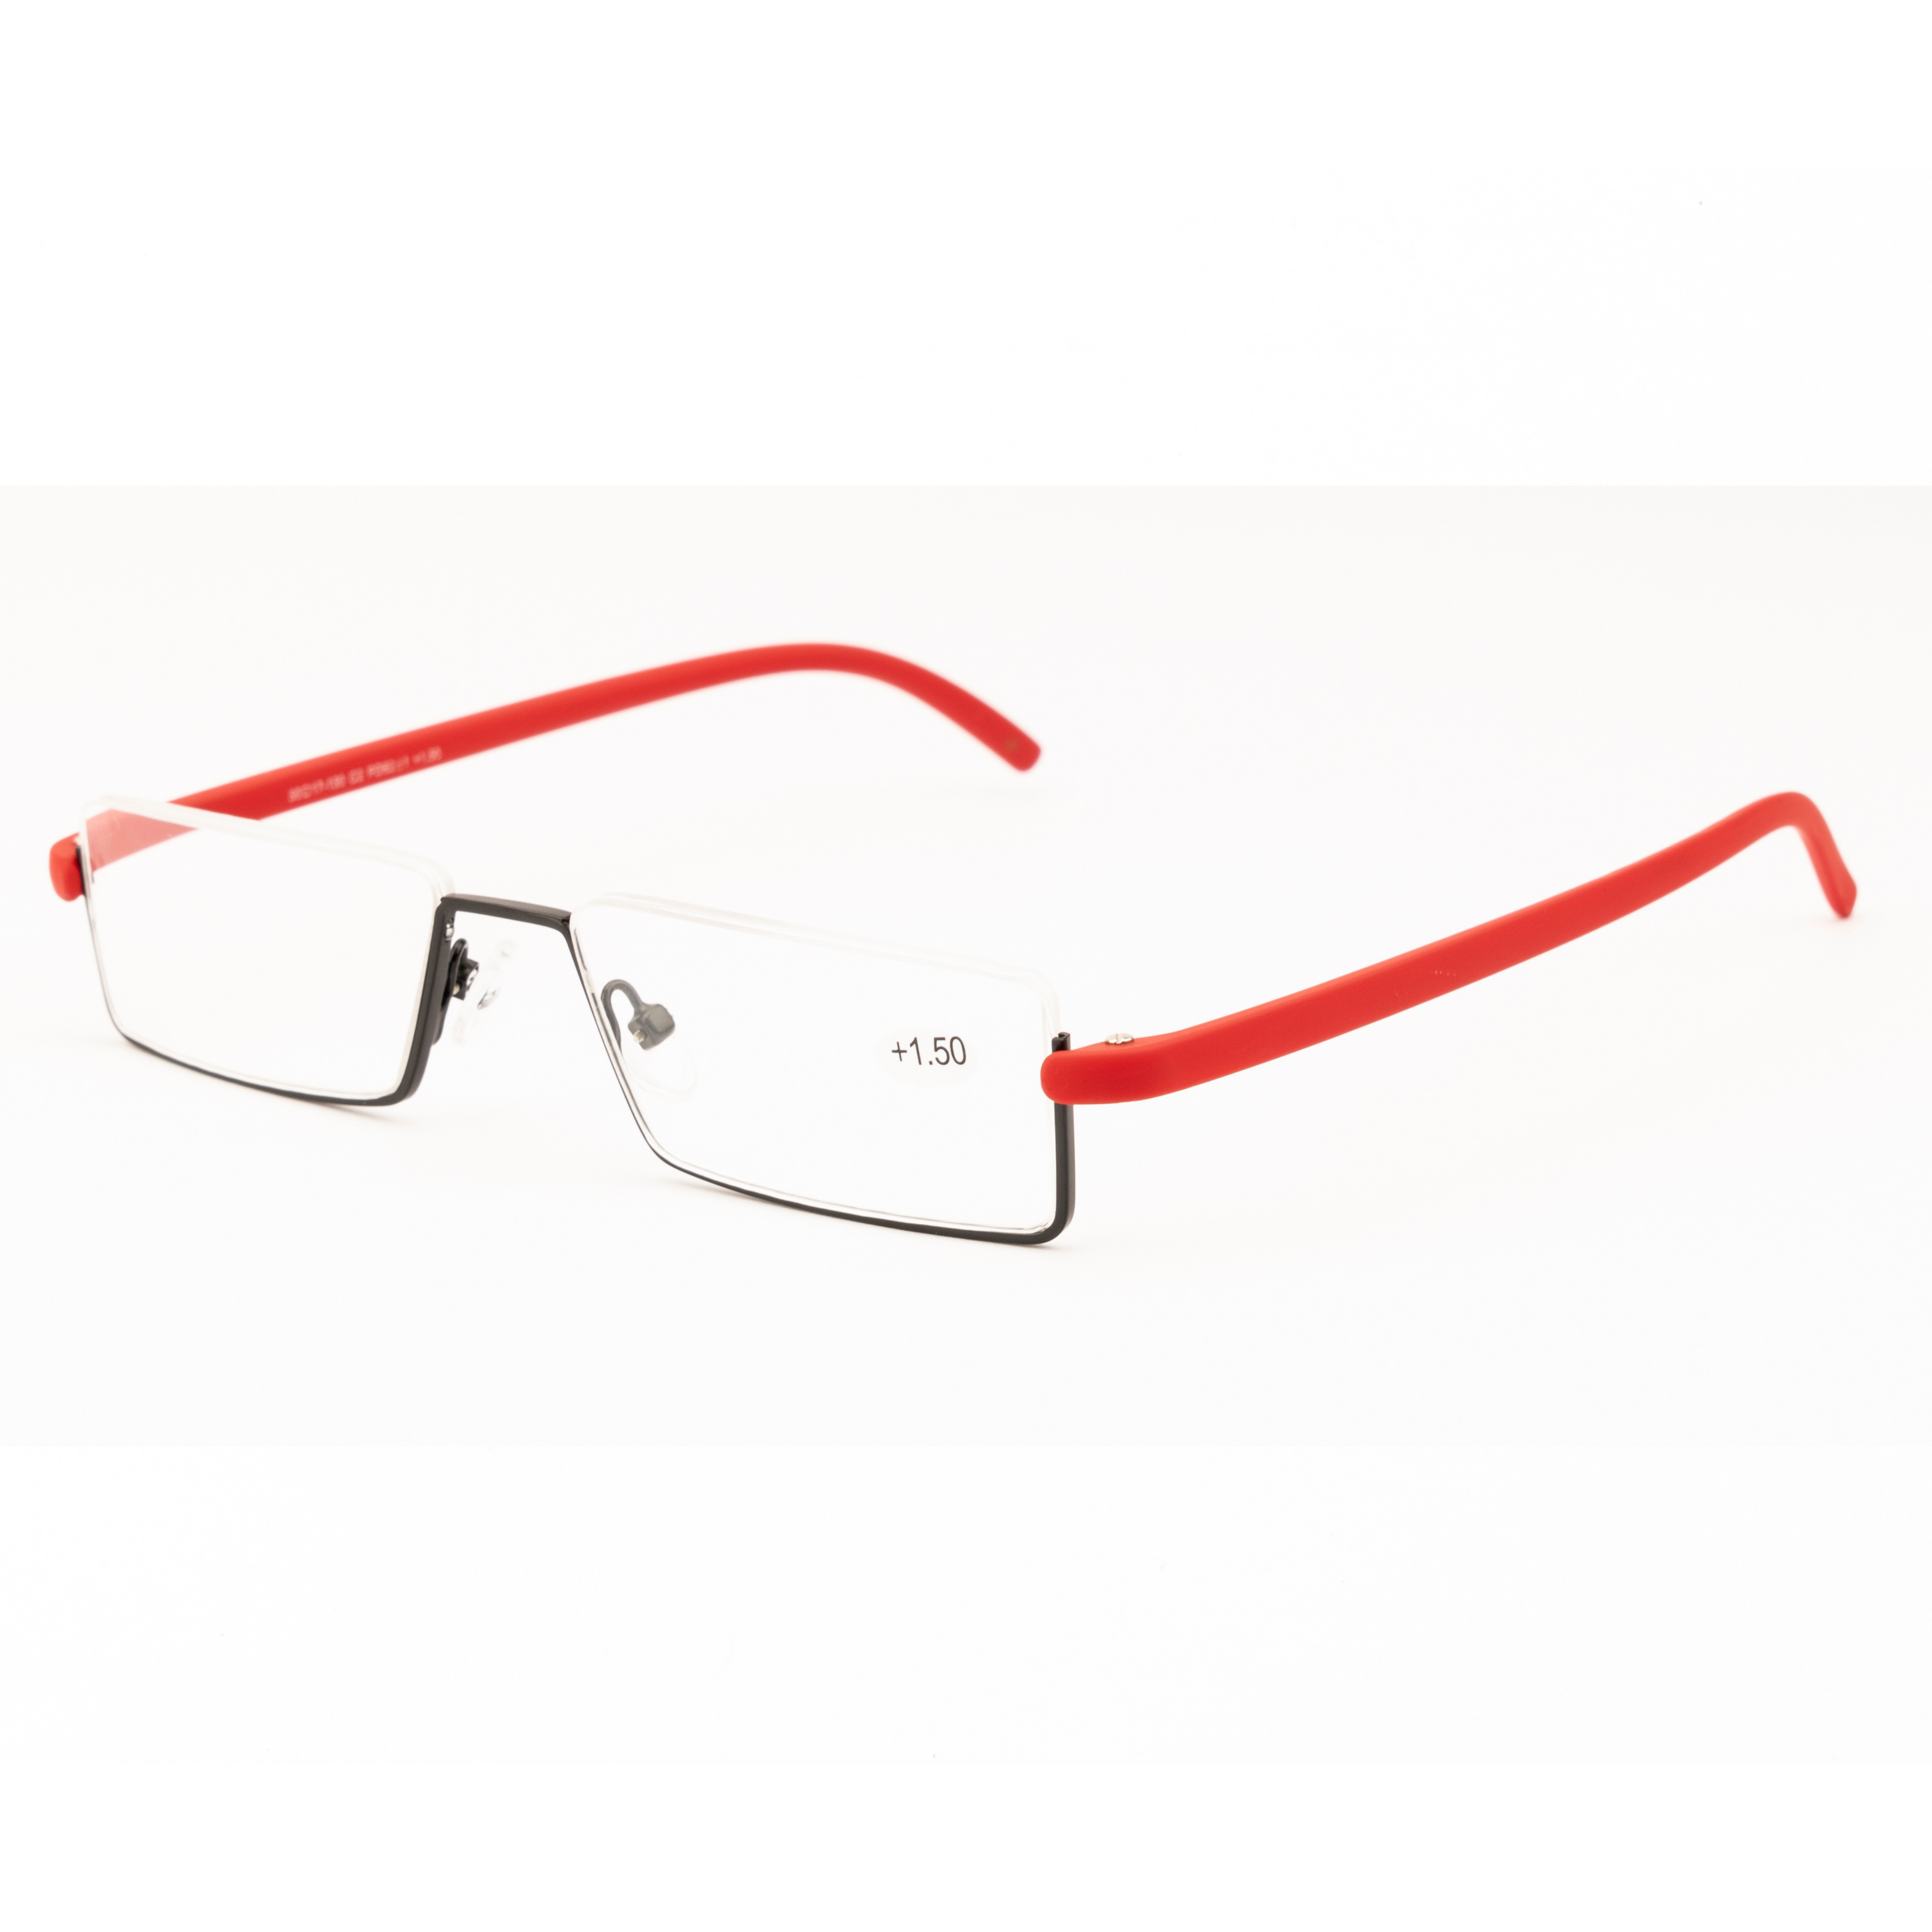 Velocity - Classic Reading Glasses for Men and Women Power